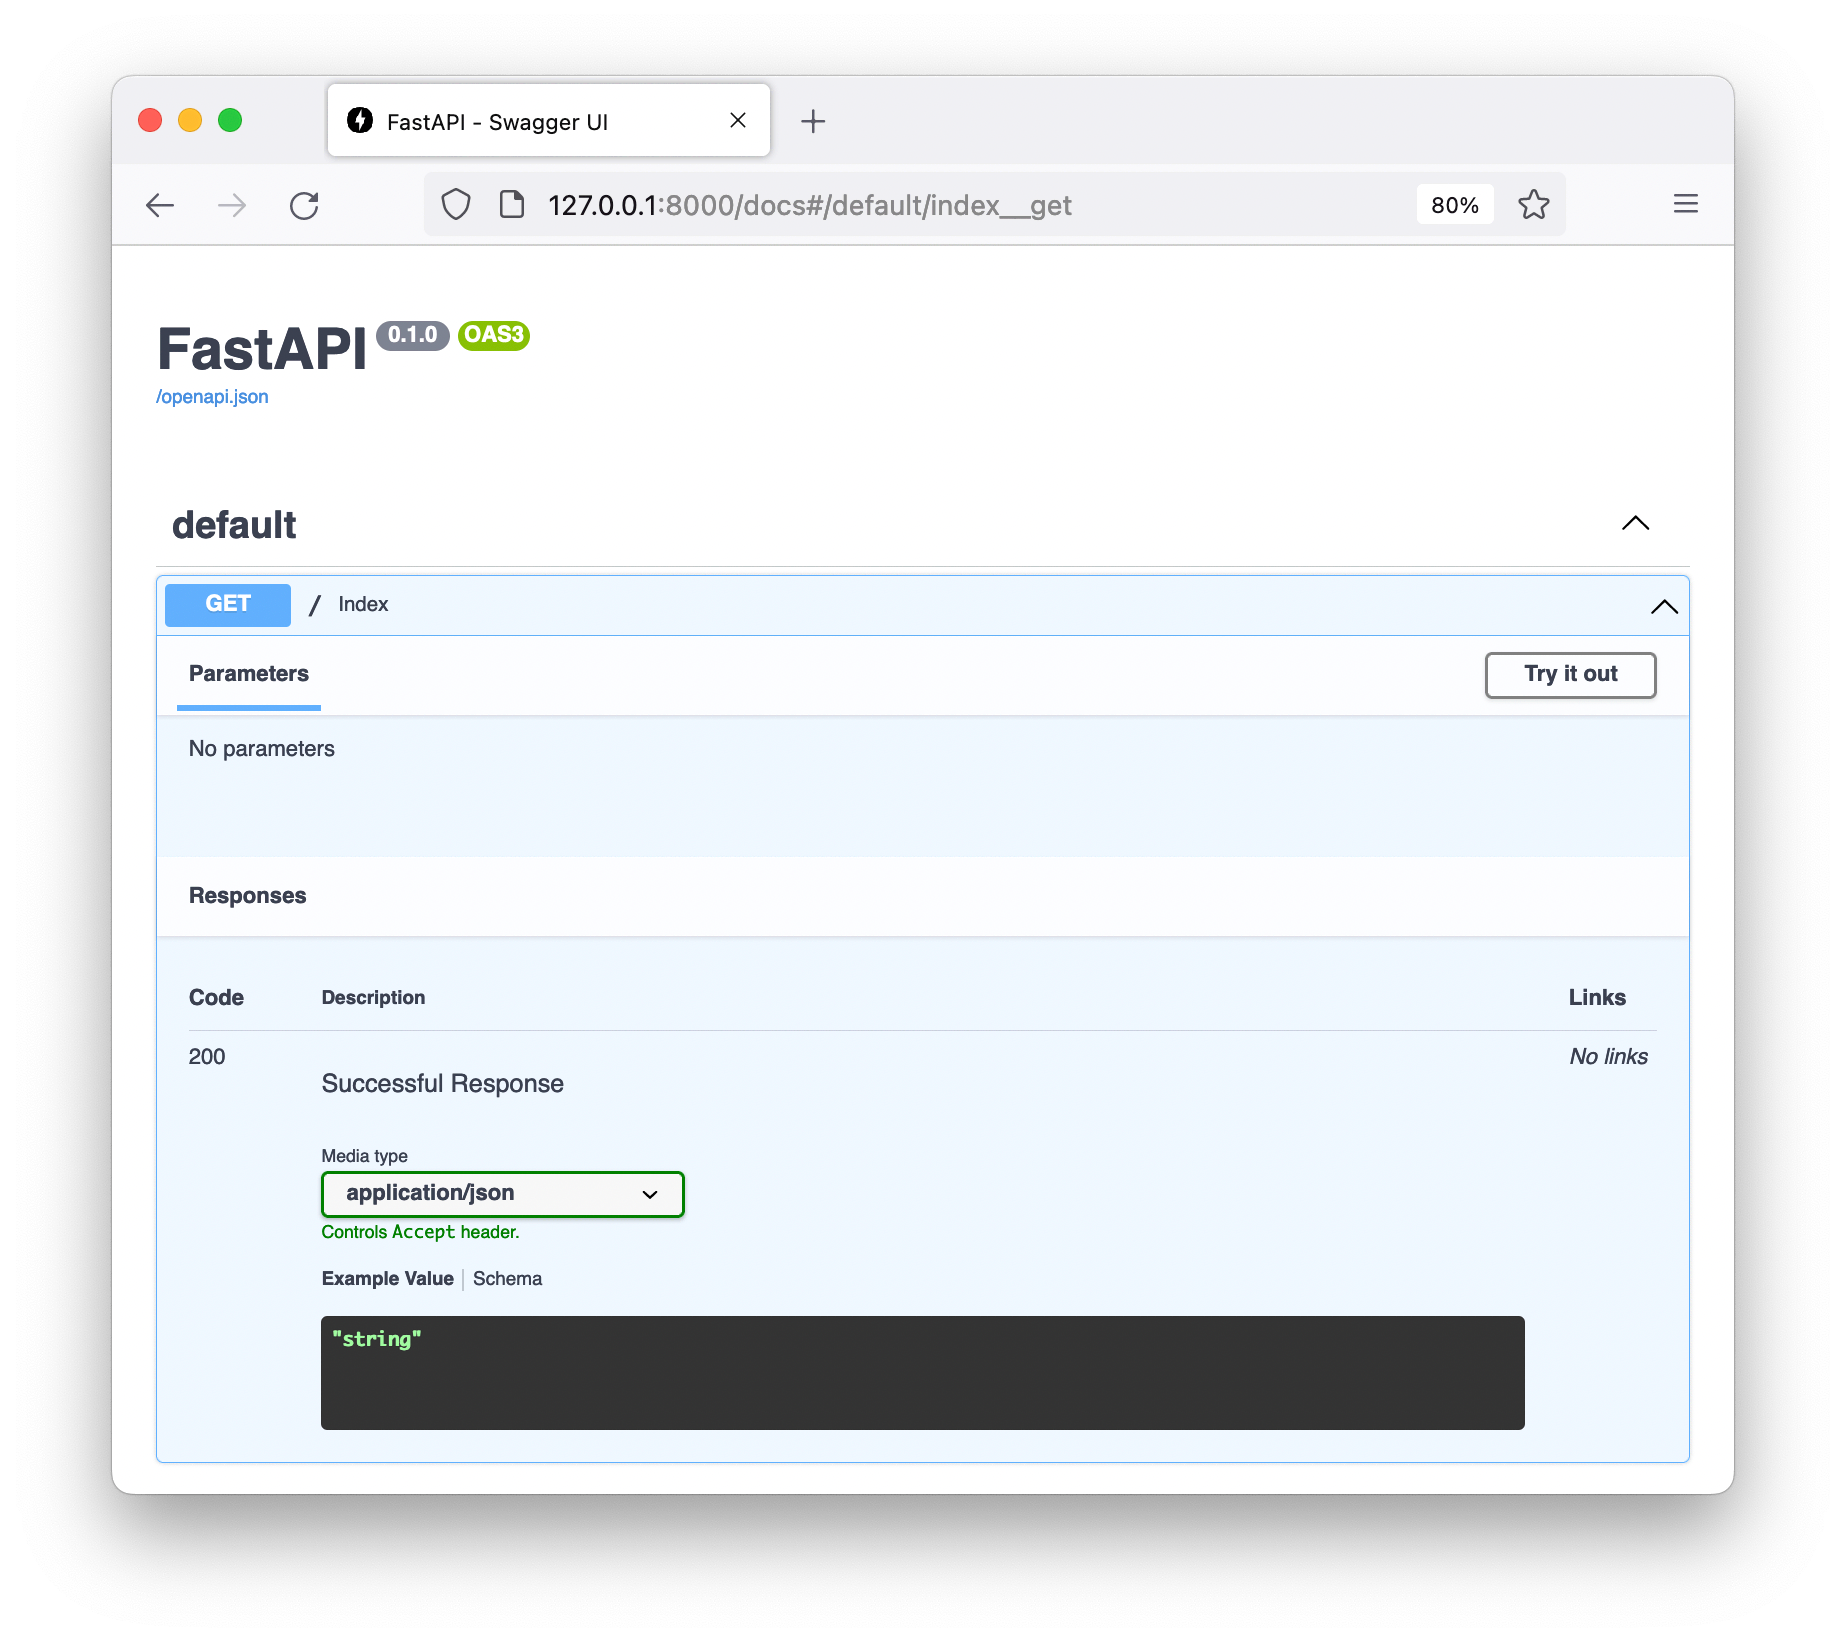 Swagger UI page for a simple FastAPI application.